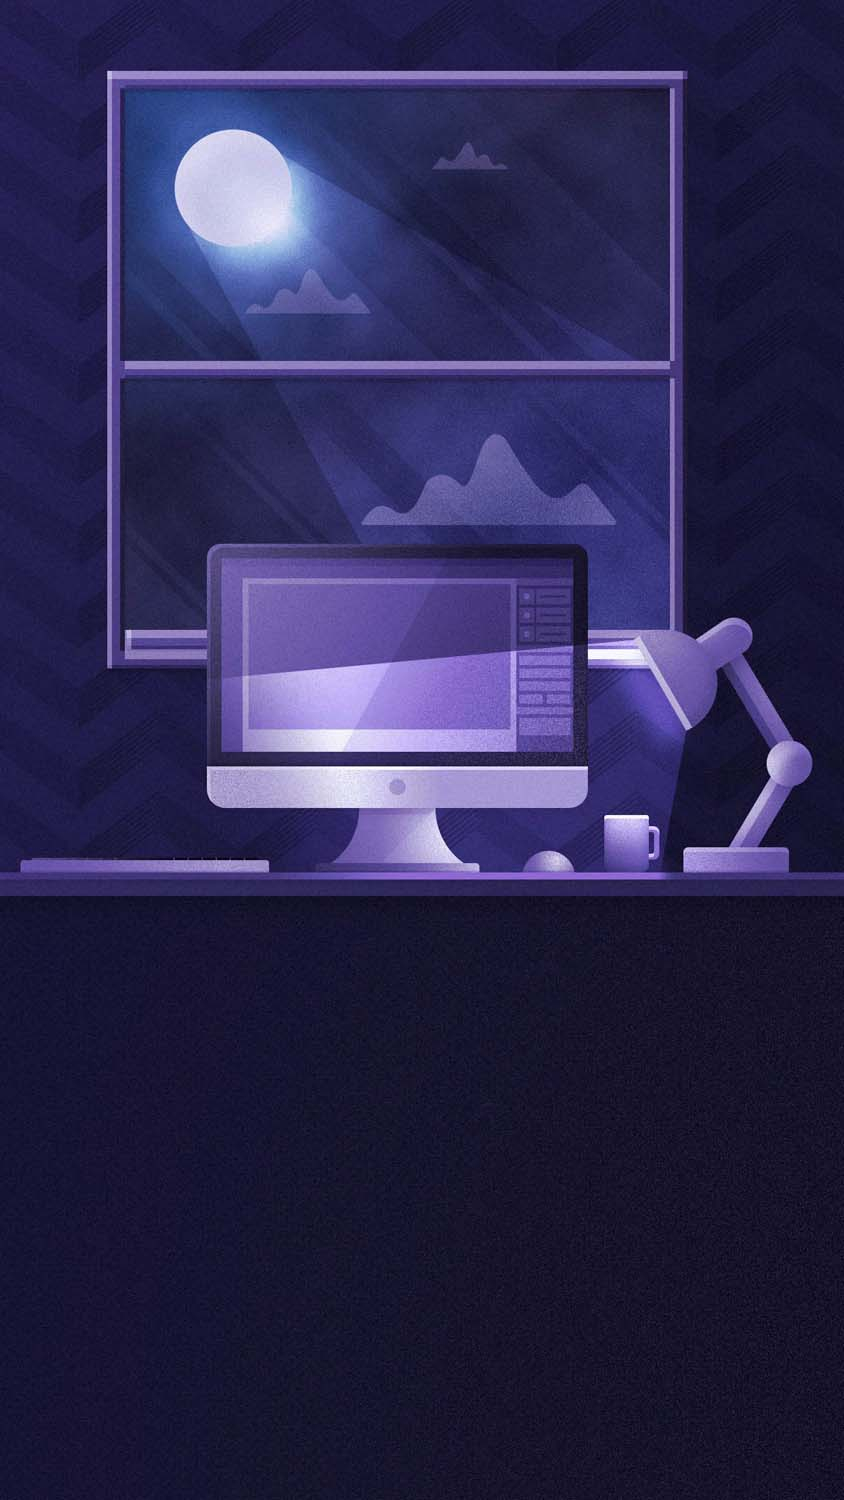 Battle Station IPhone Wallpaper HD  IPhone Wallpapers